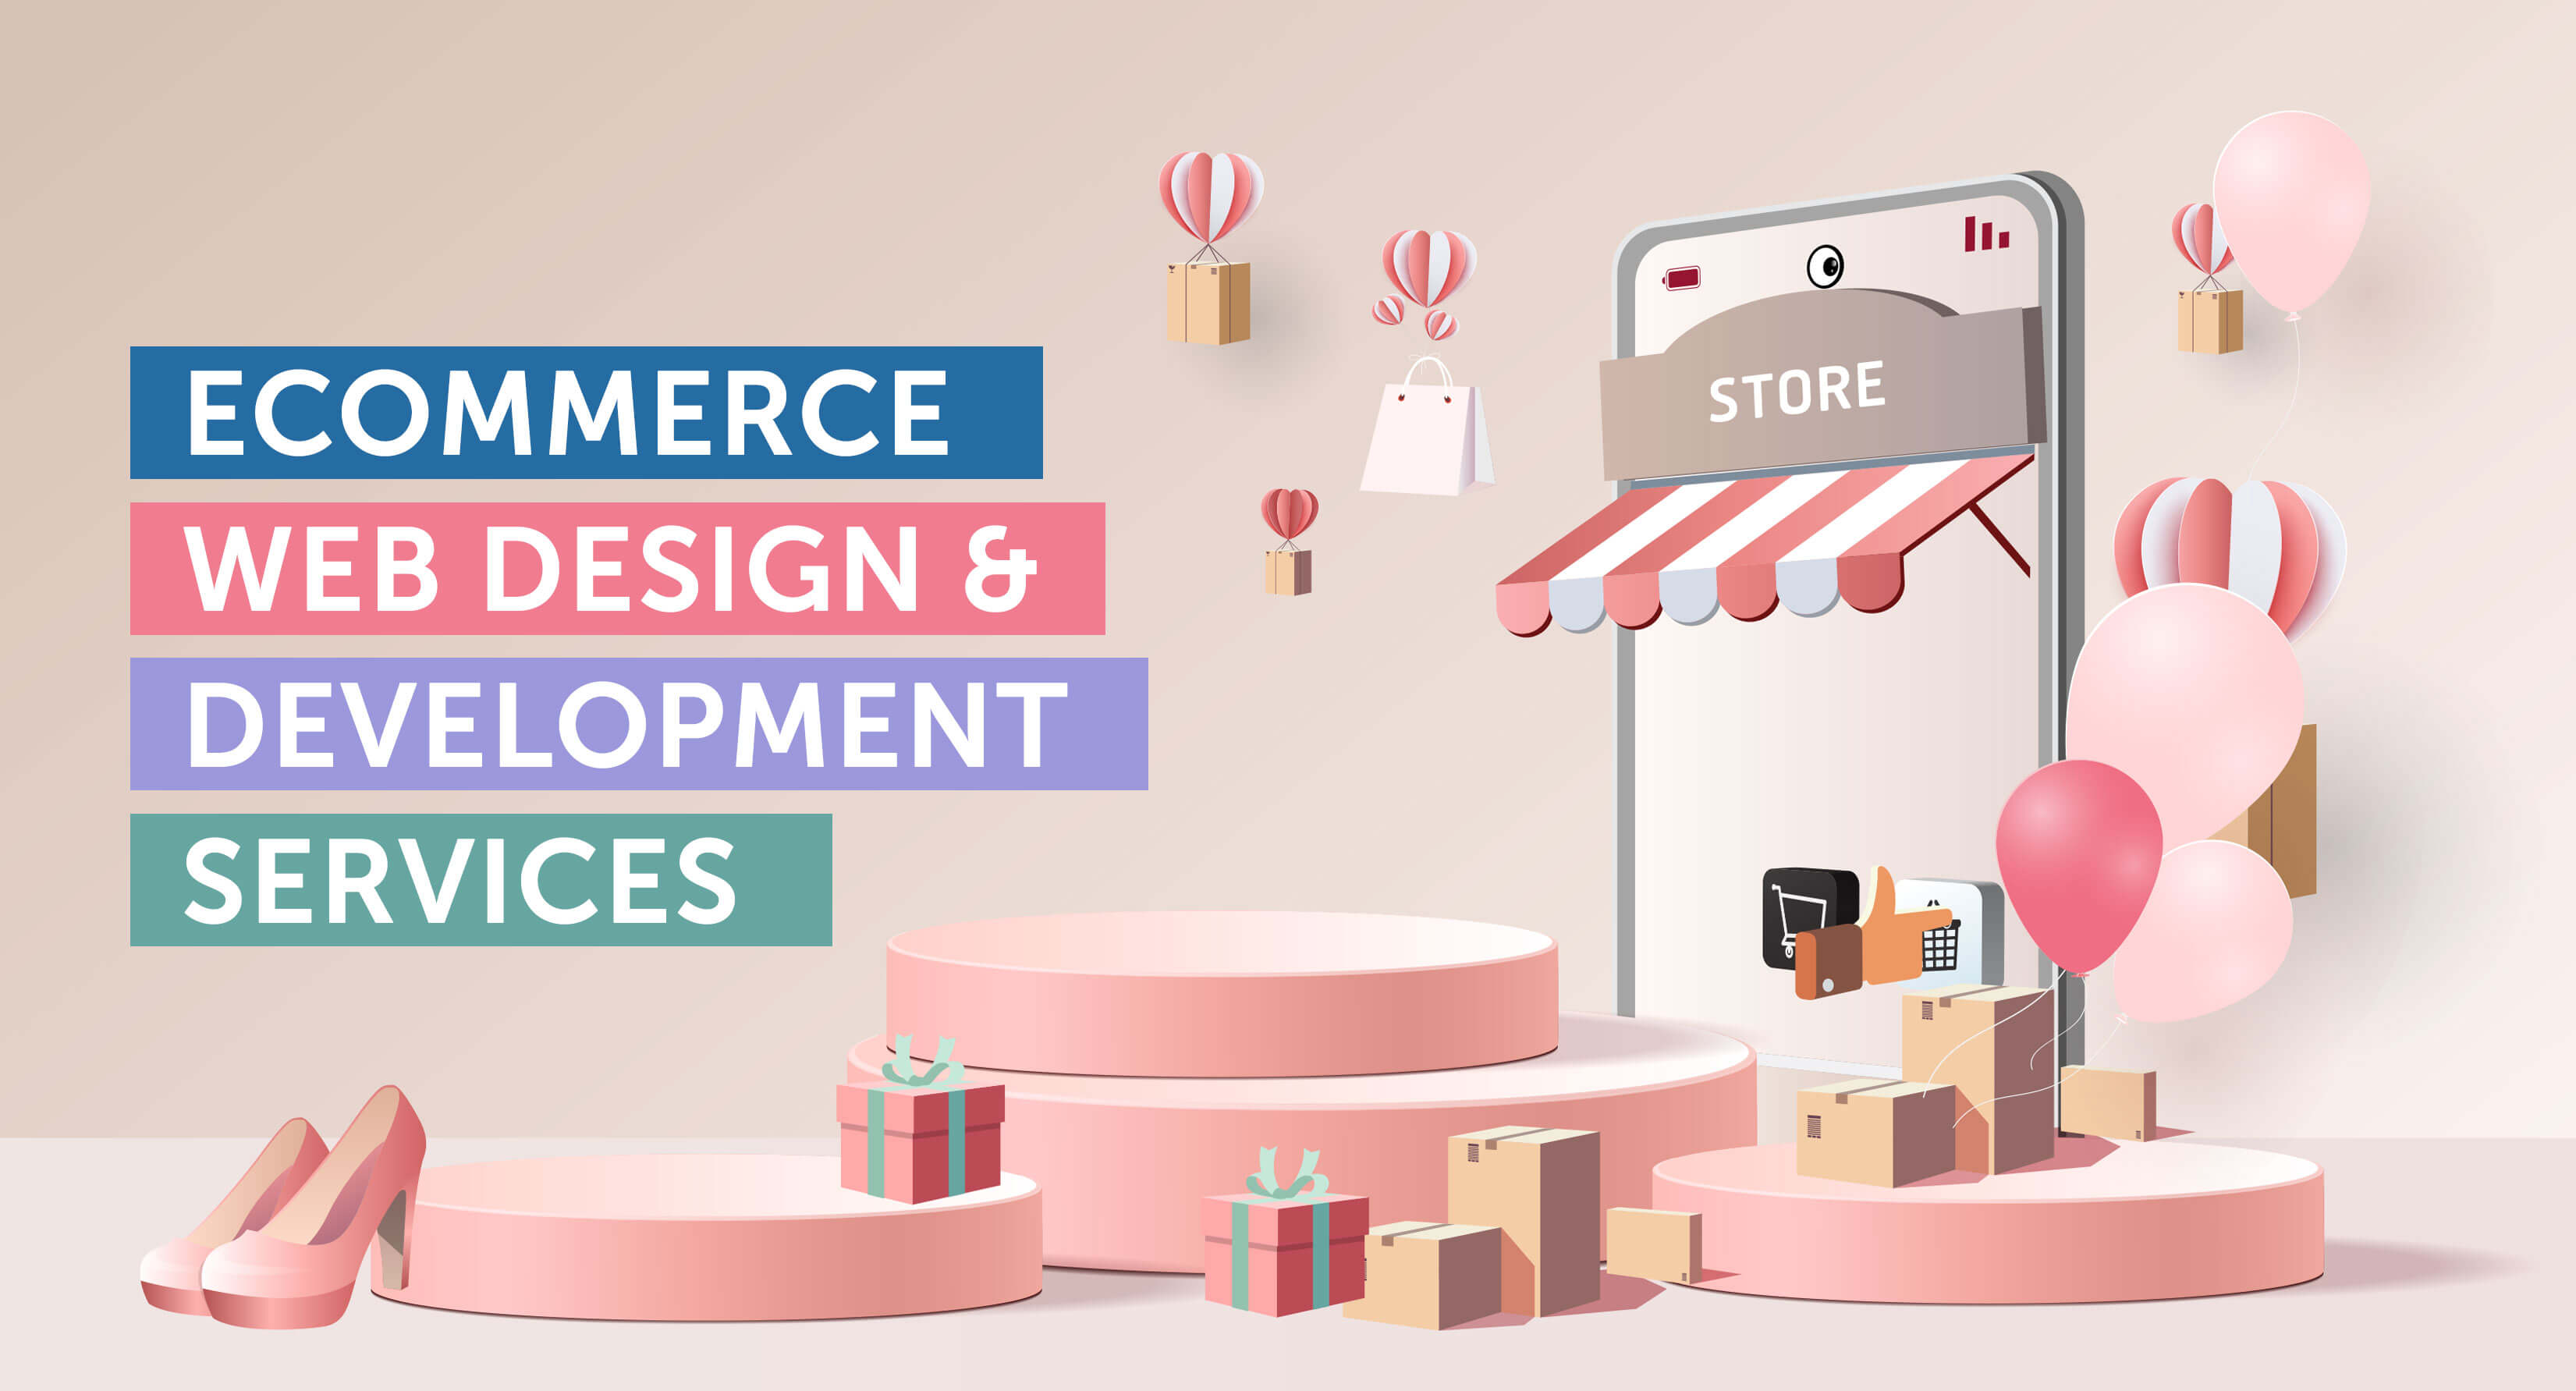 What is the Process for Driving More Sales with eCommerce Website Design and Development Services?